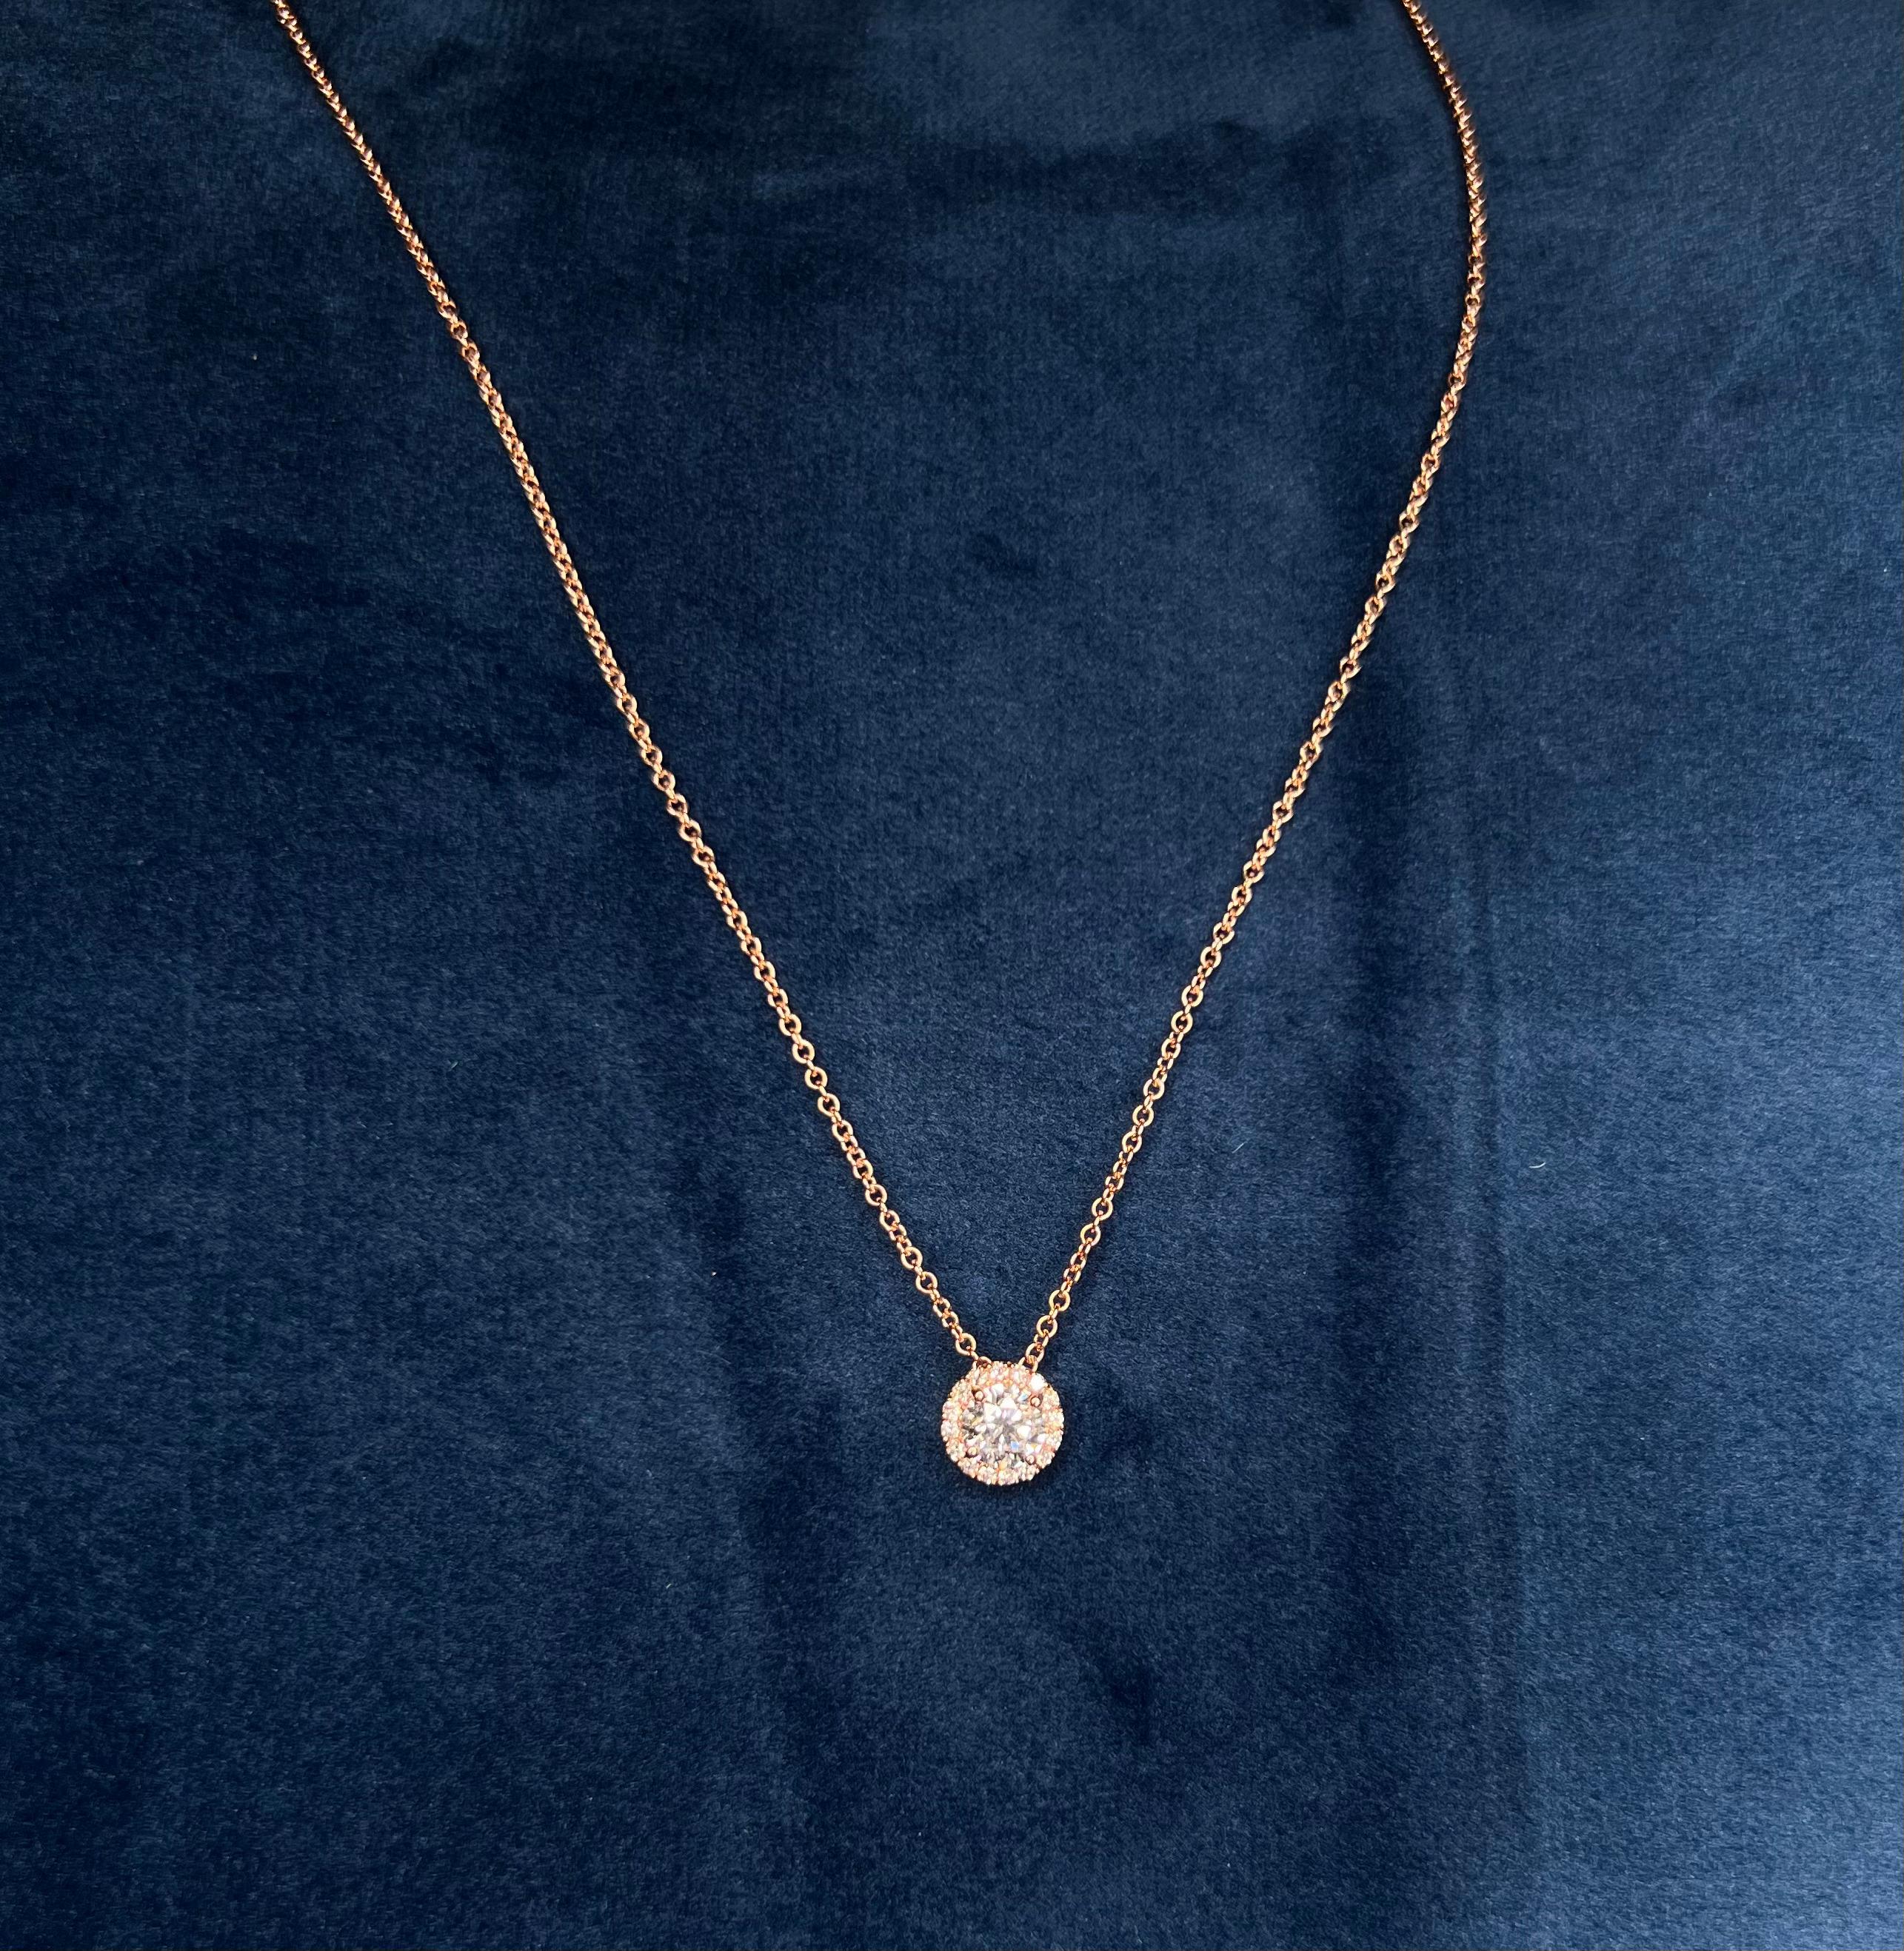 14k Rose Gold 0.40 Carat Round Cut Diamond Solitaire Pendant Necklace In New Condition For Sale In Los Angeles, CA